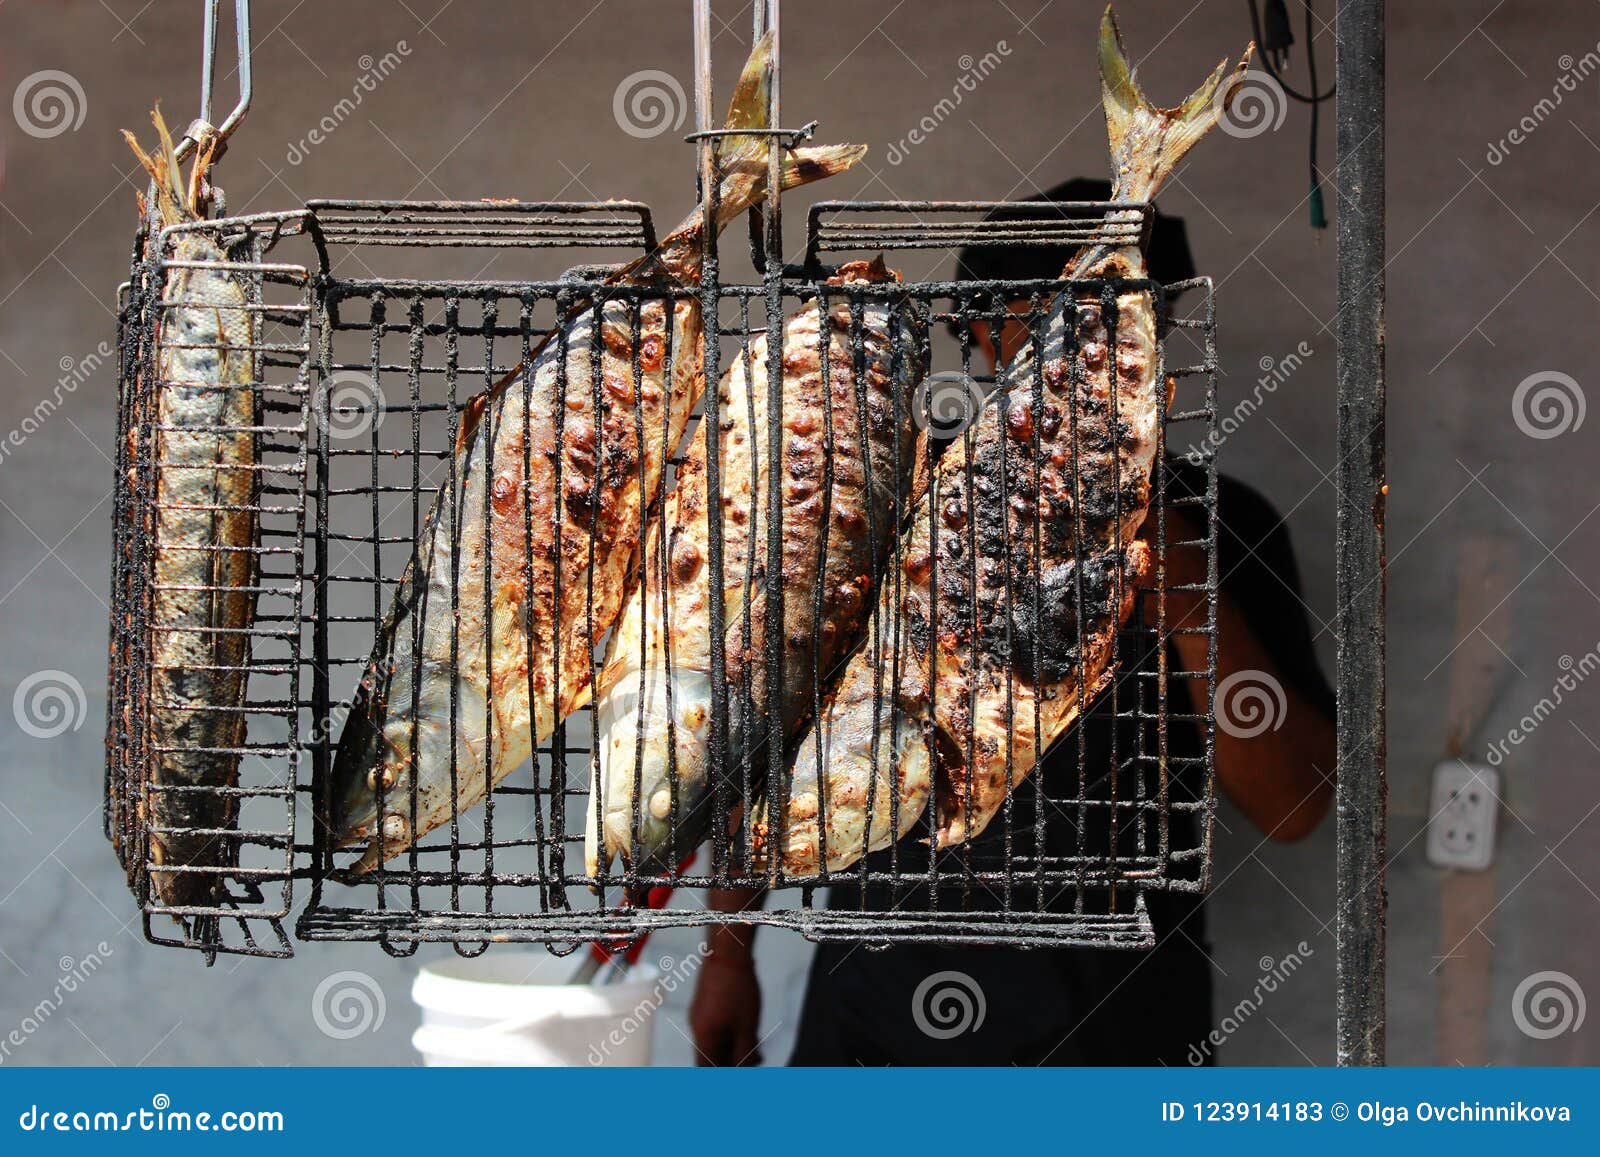 Fried Fish Cooked Entirely On An Open Fire On The Embankment Near The Black Sea On The Grill ...